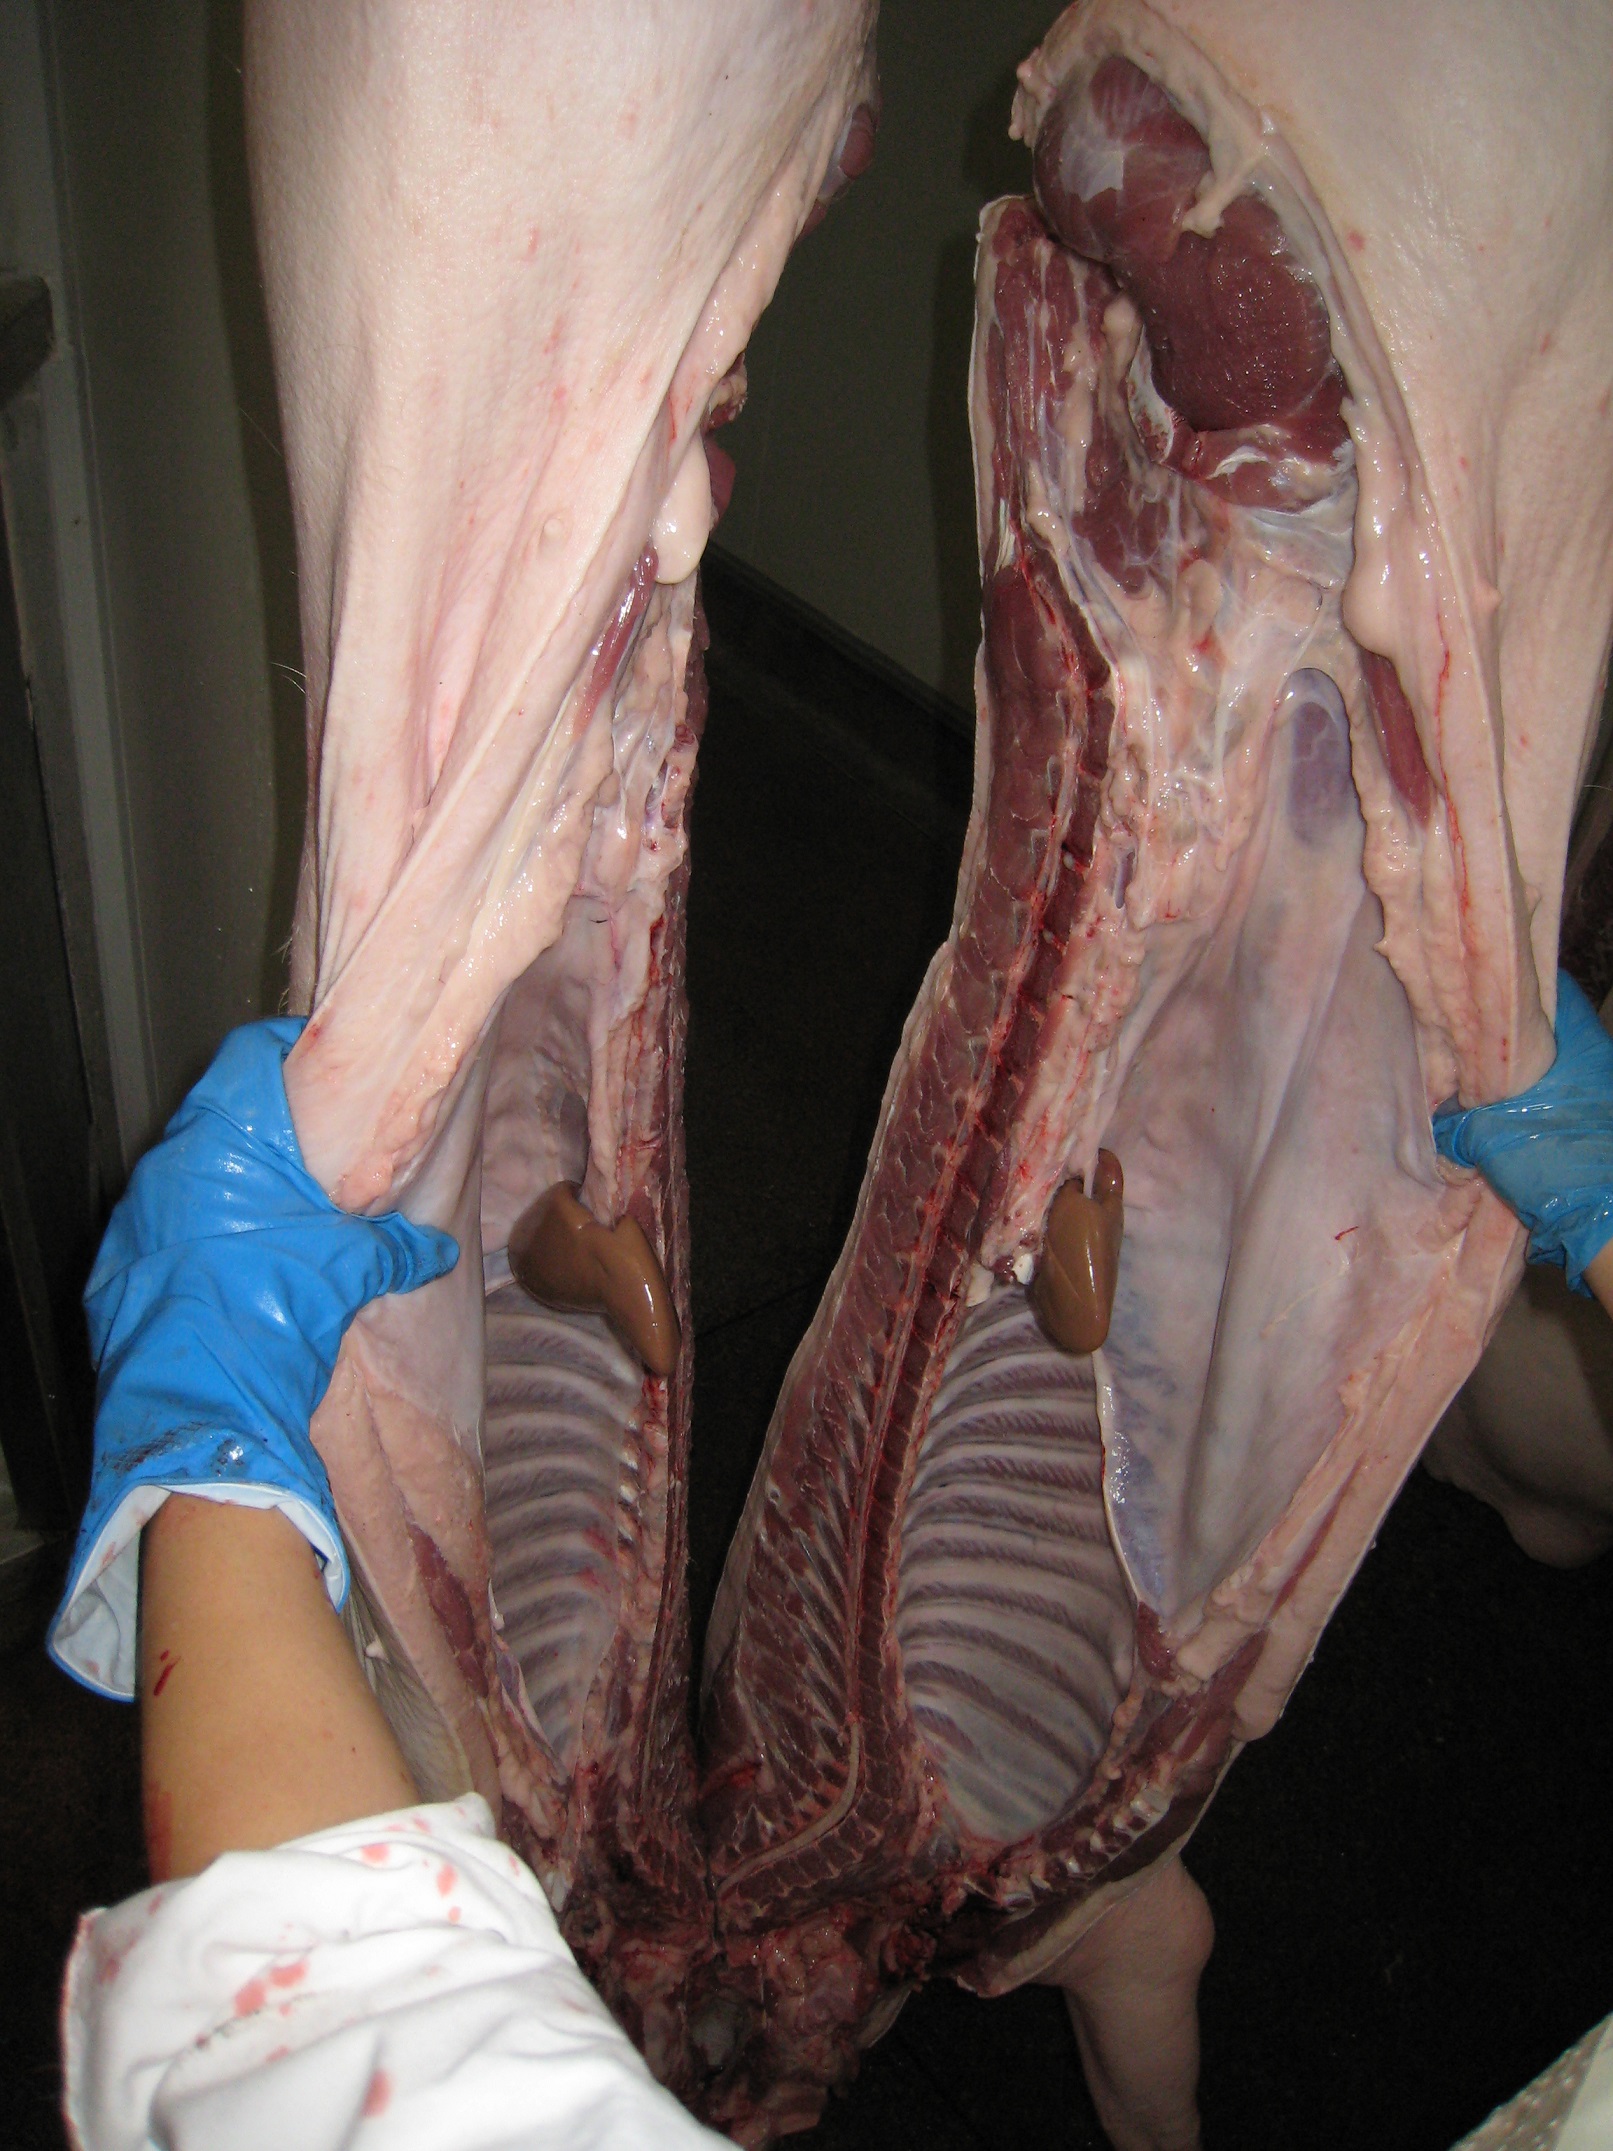 Inspector checking pig carcase at abattoir wearing blue gloves